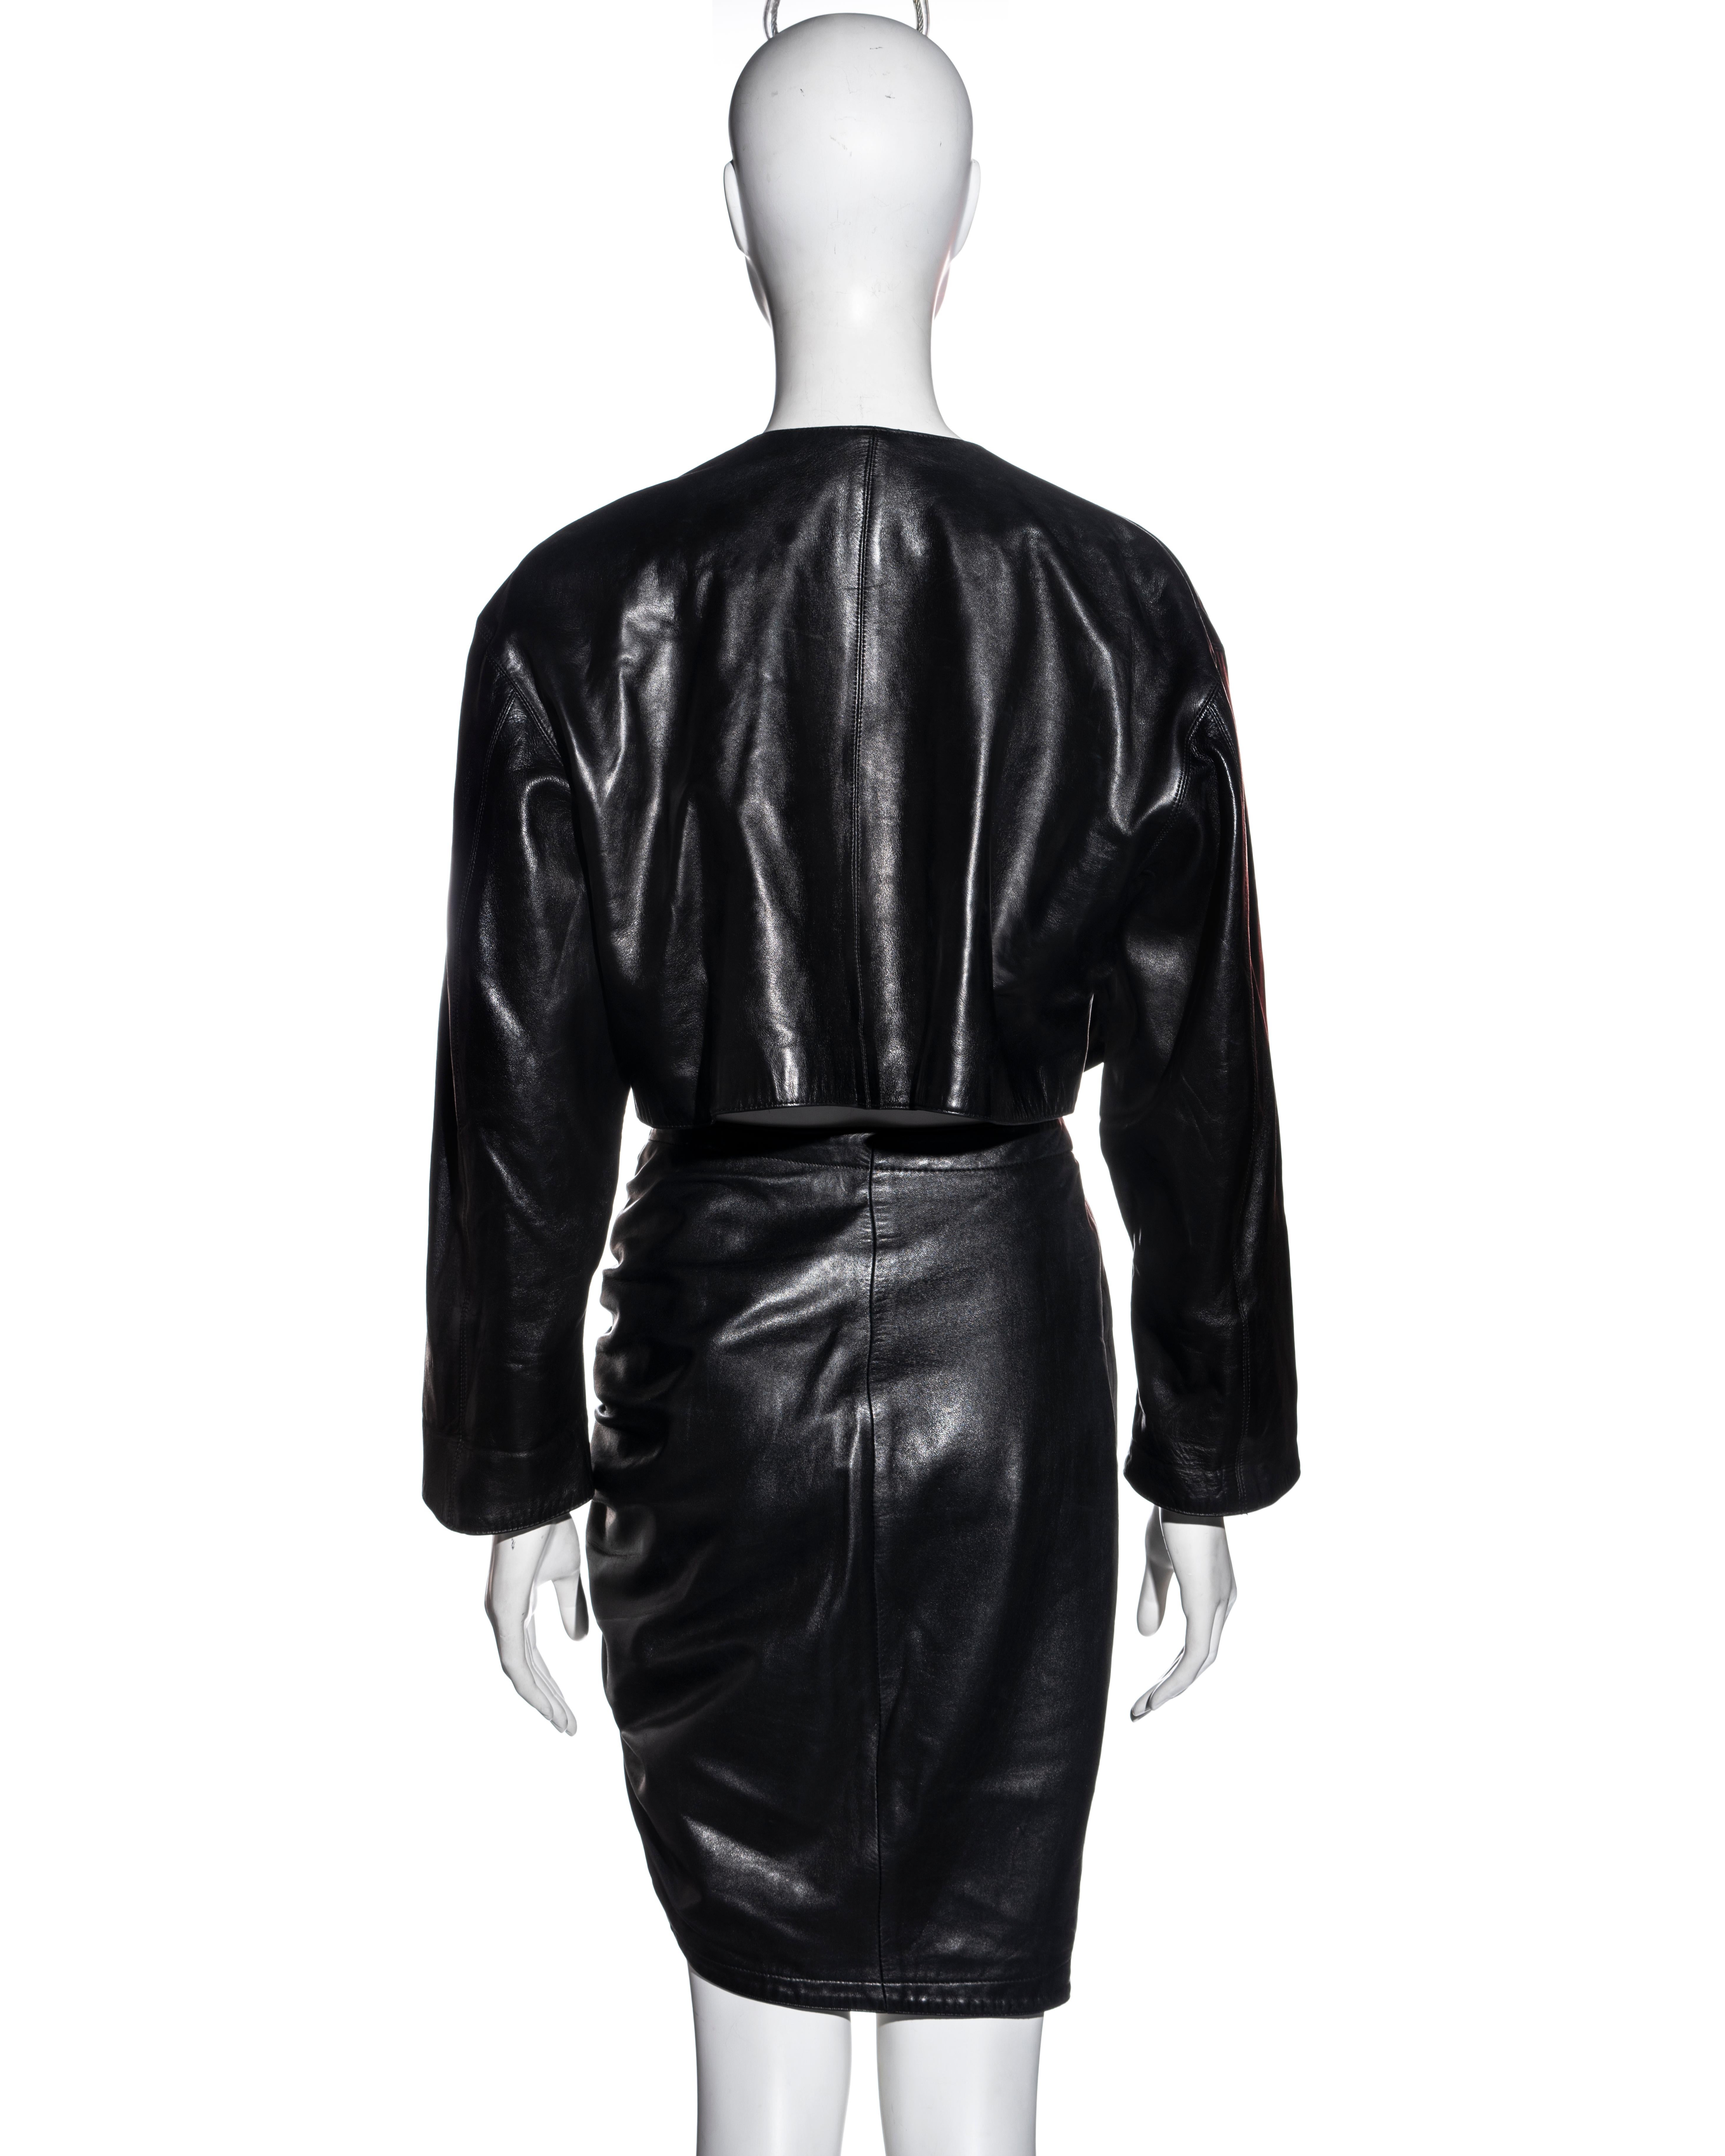 Azzedine Alaia black leather jacket and skirt set, fw 1983 For Sale 3